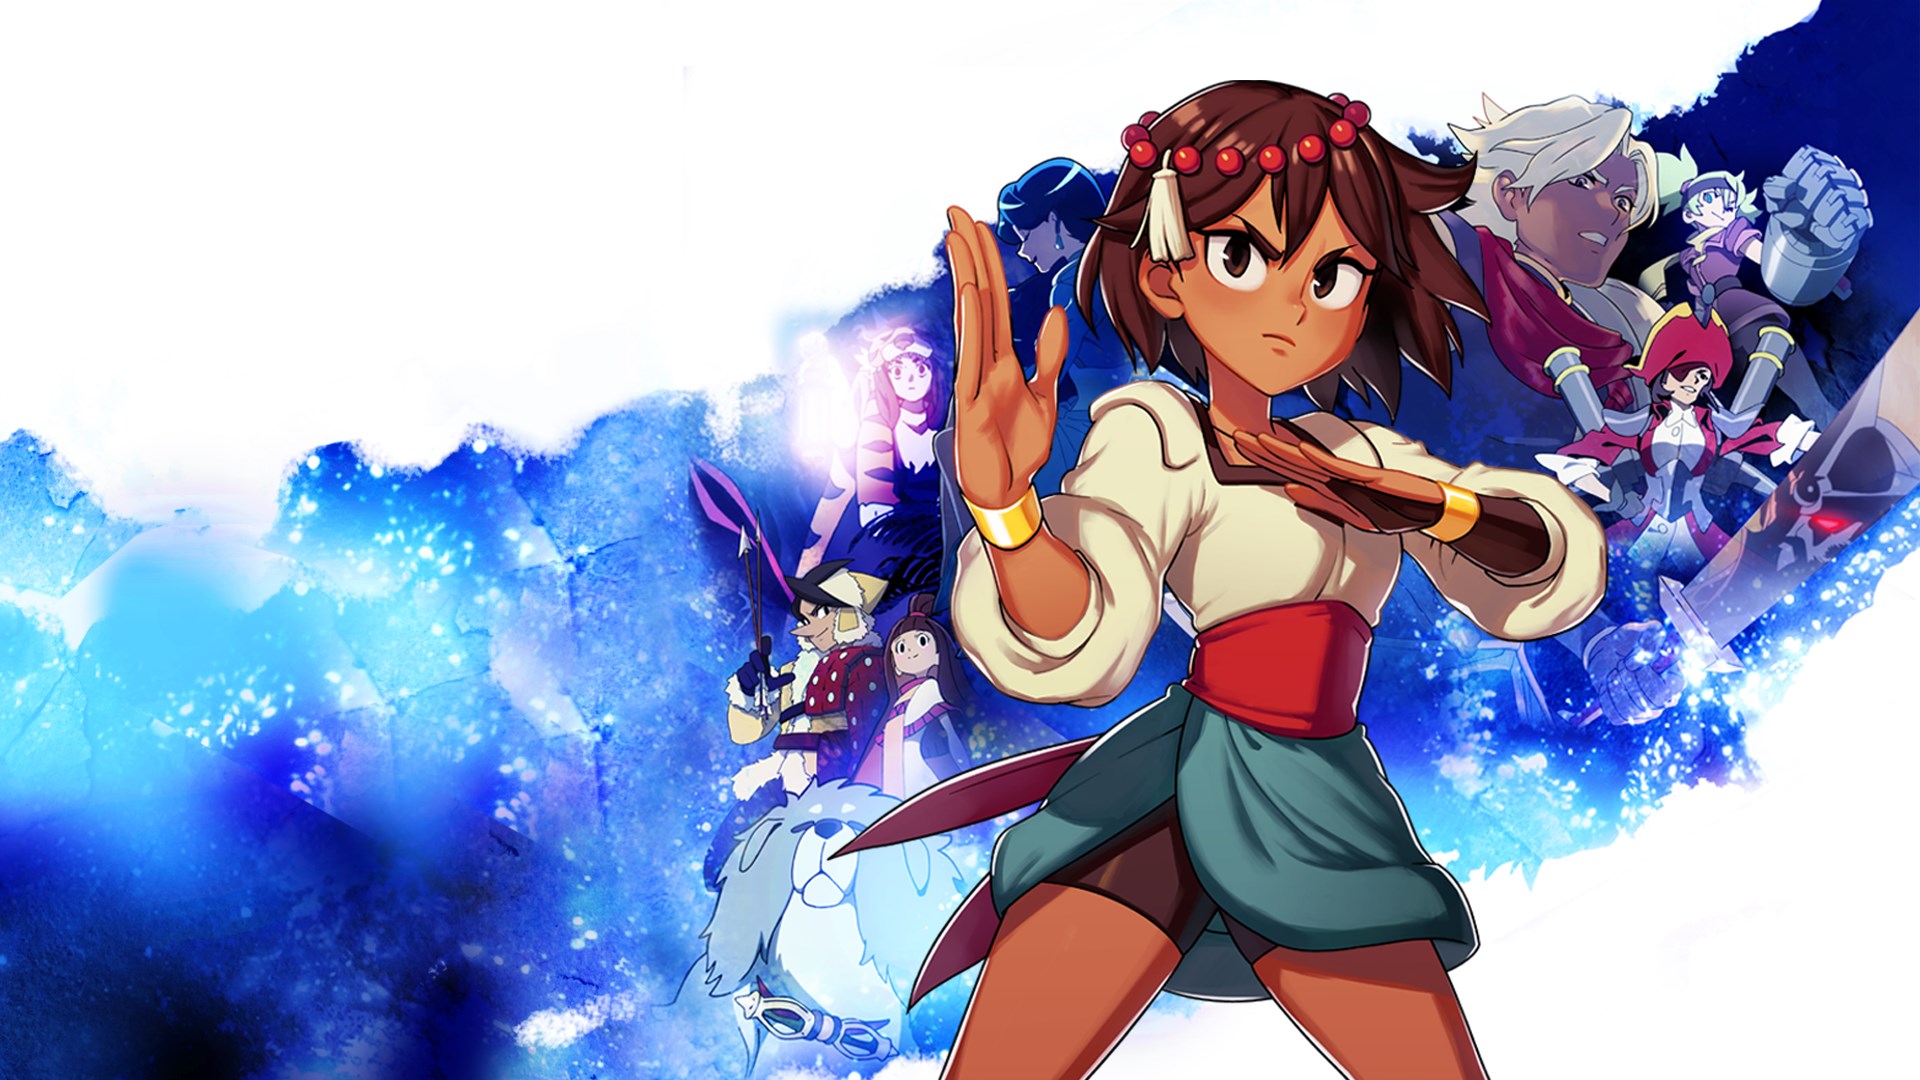 Indivisible - Xbox One review